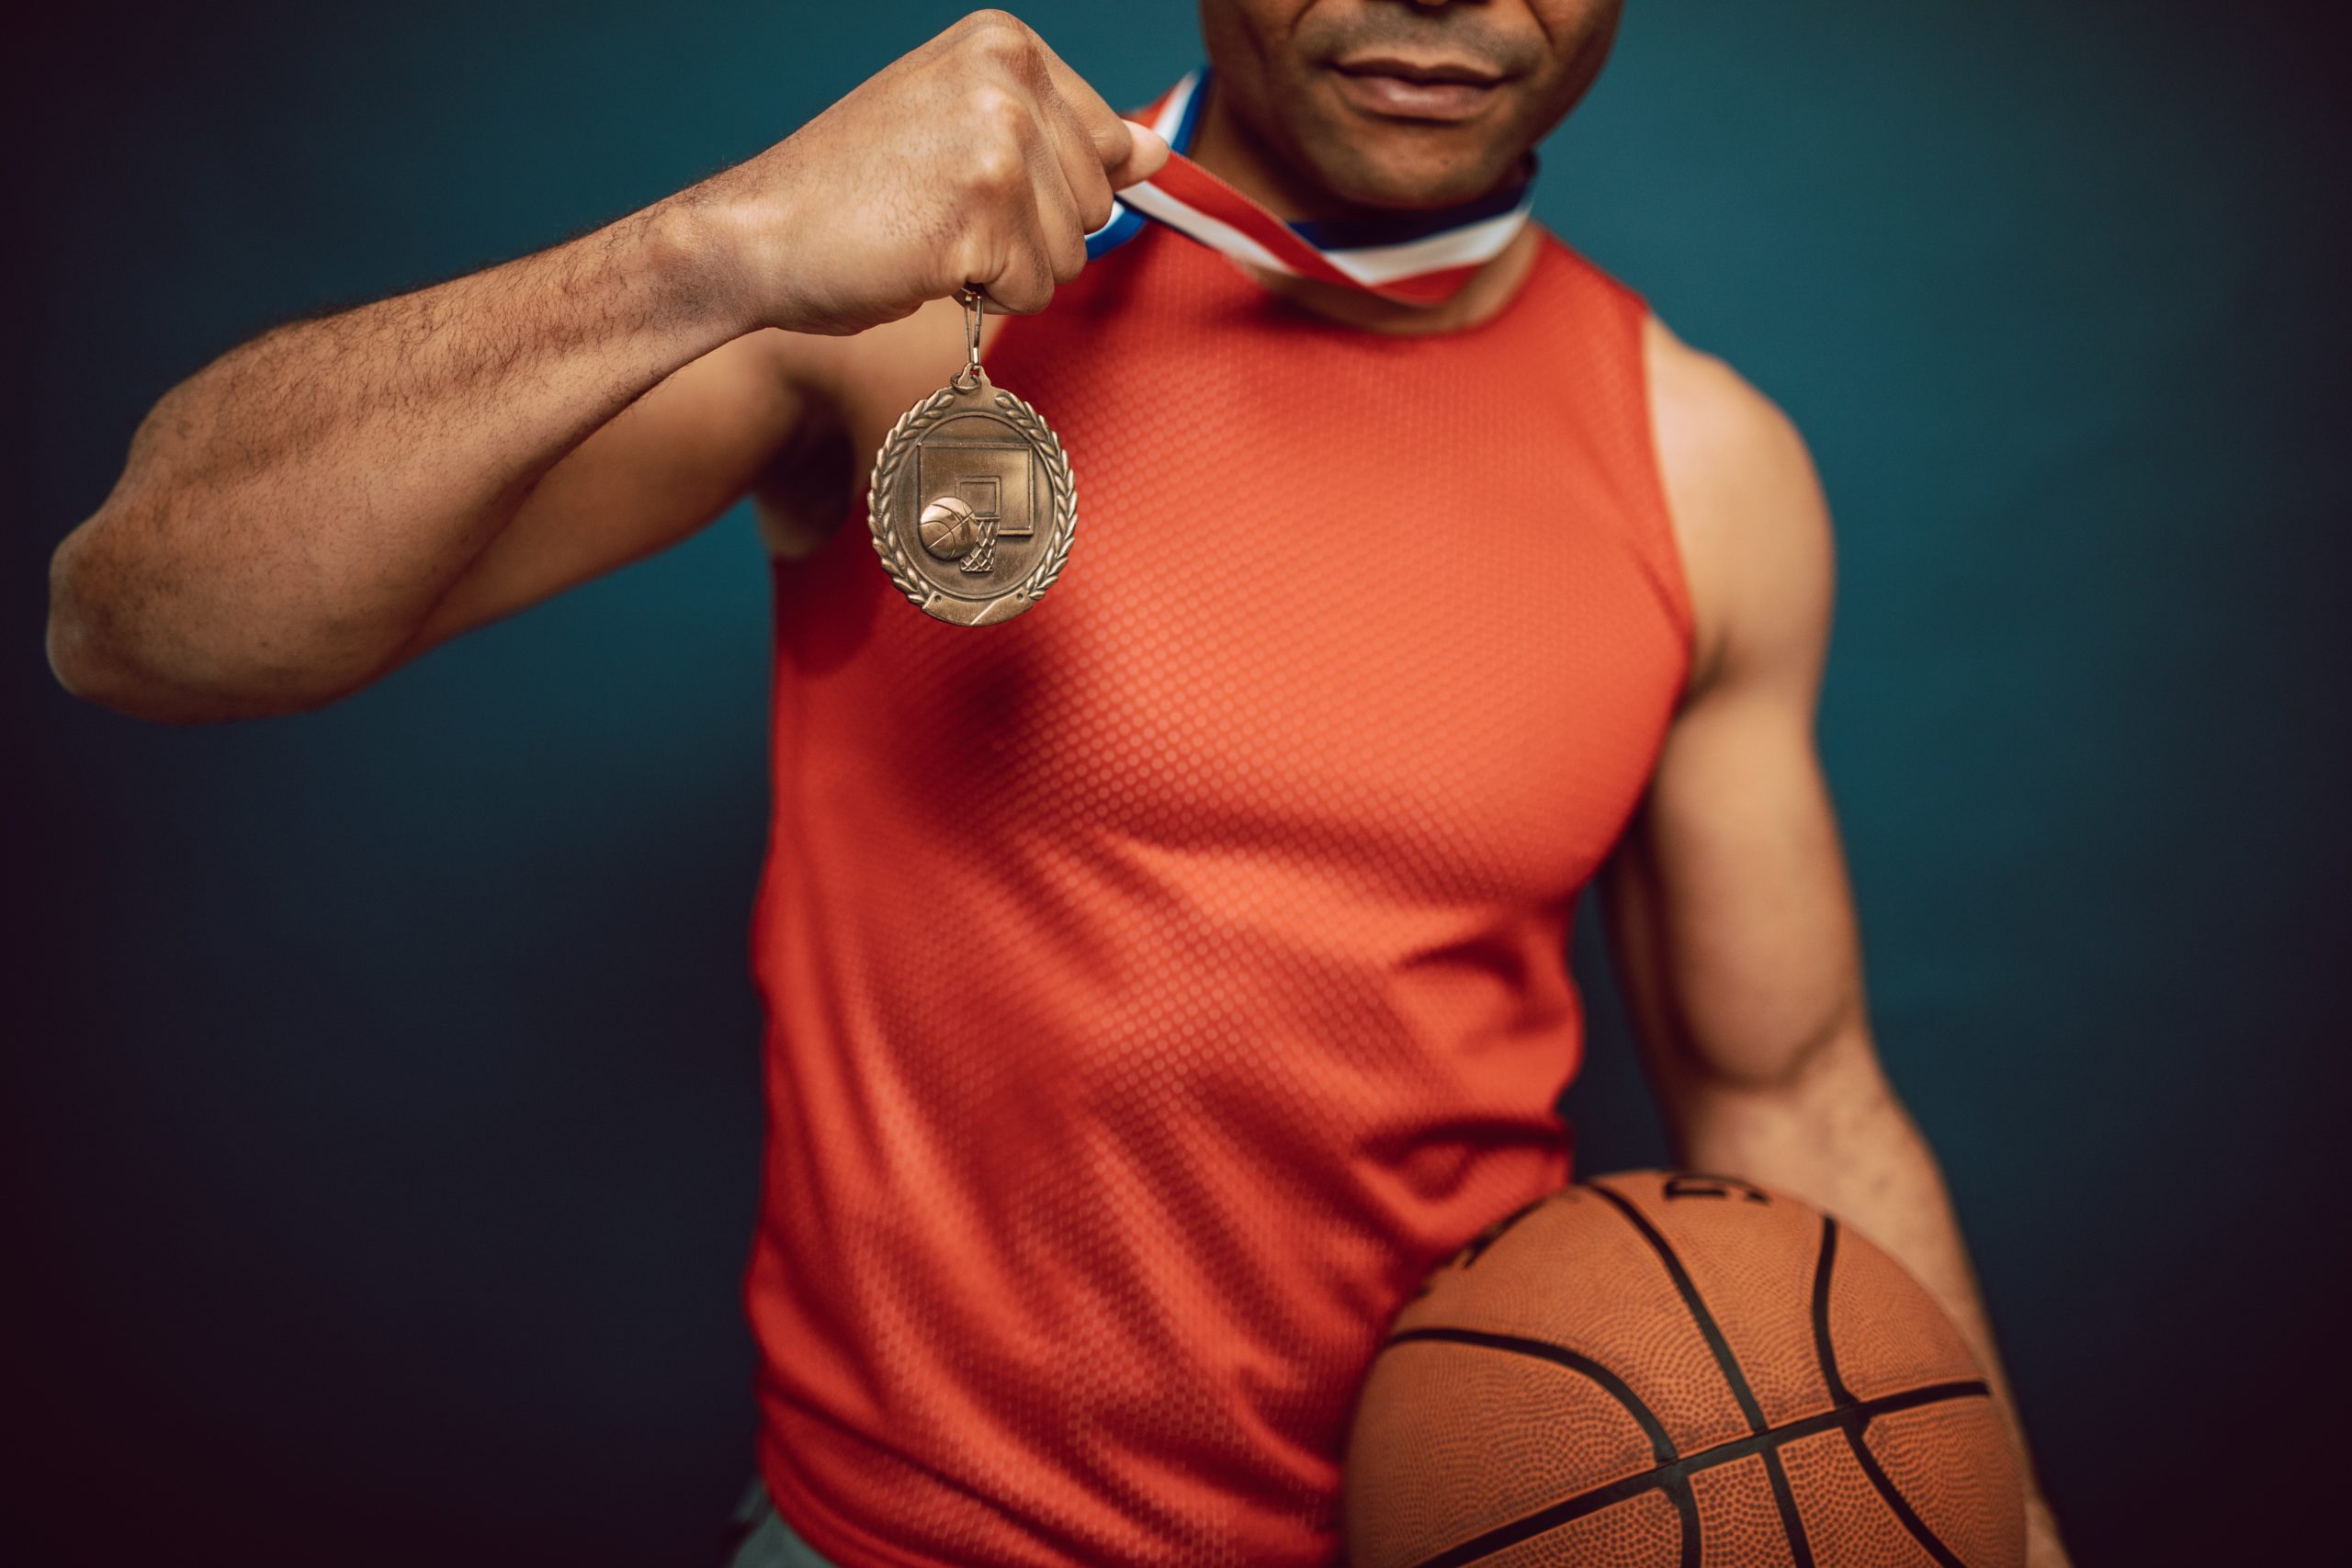 5 Ways Athletes Can Boost Their Self-Confidence | Athlete Basketball Player Holding a Gold Medal